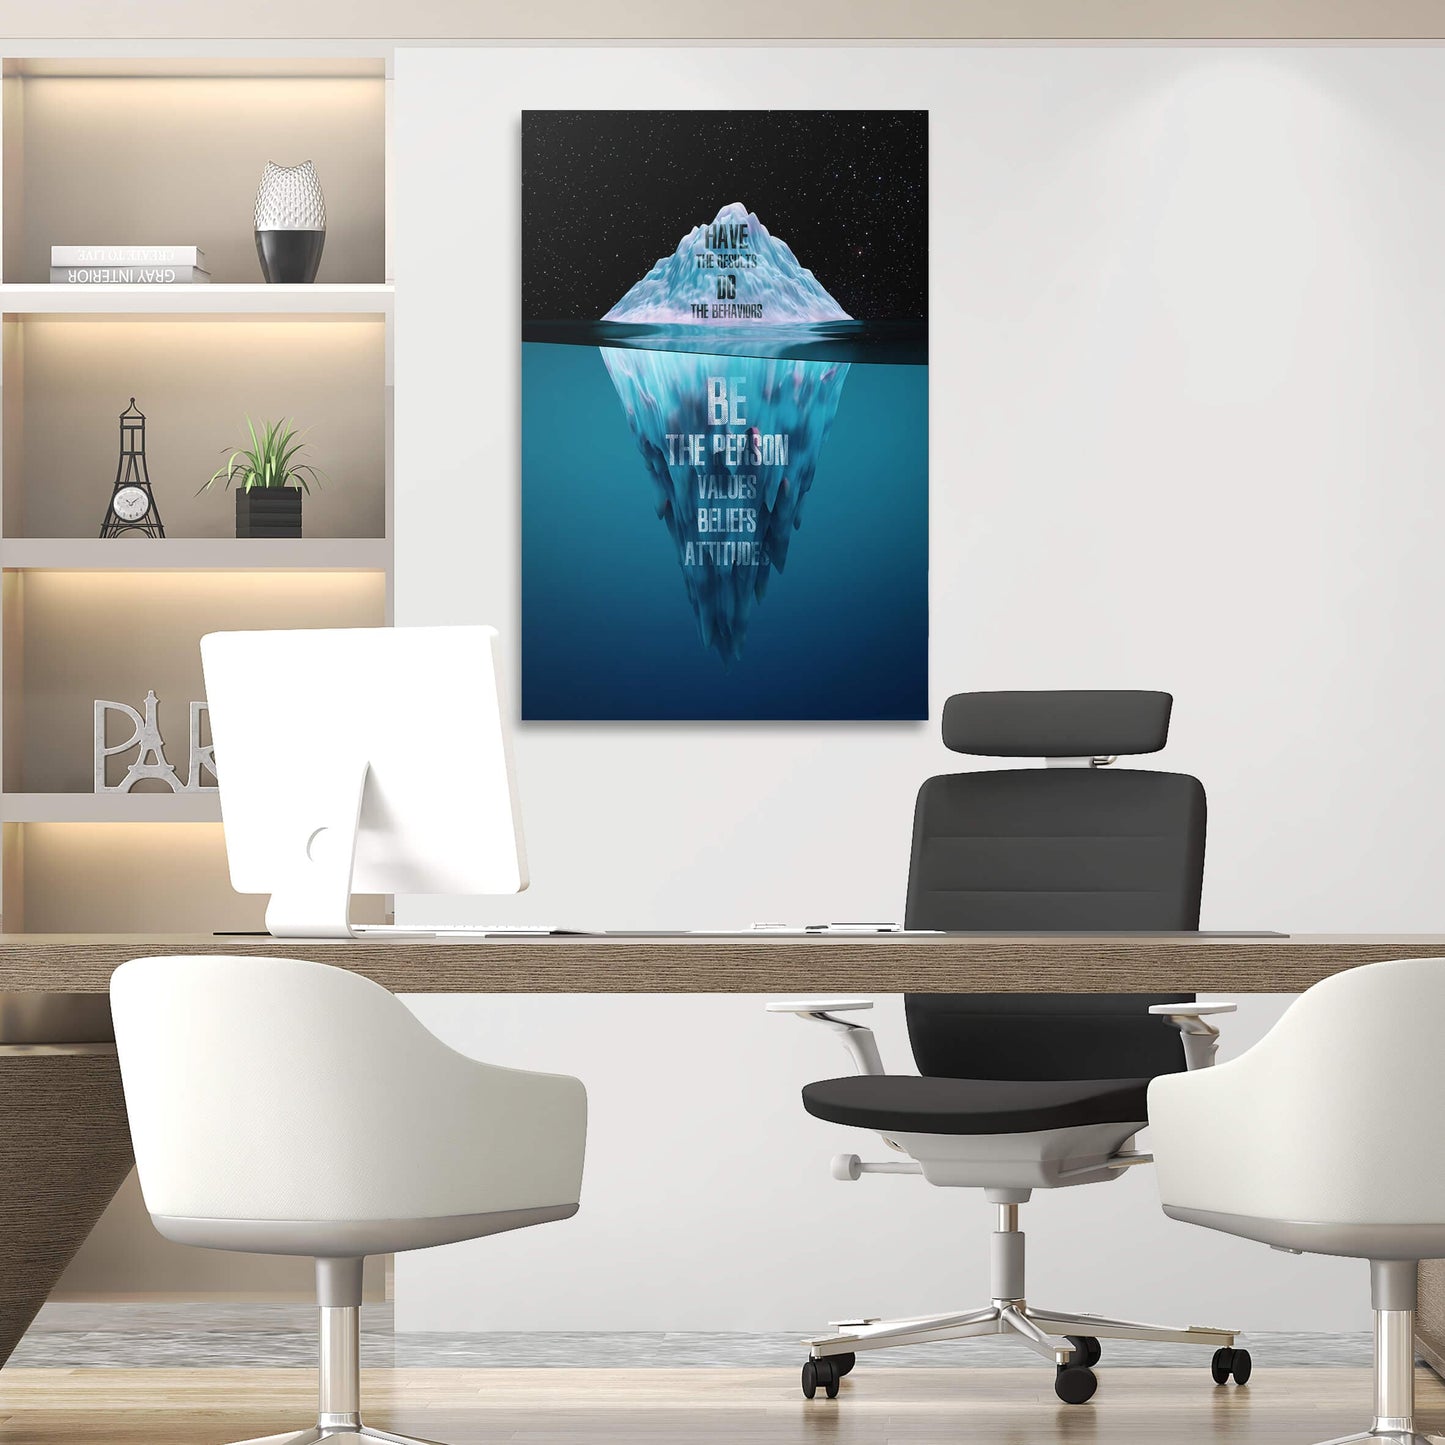 Be Do Have Iceberg Wall Art | Inspirational Wall Art Motivational Wall Art Quotes Office Art | ImpaktMaker Exclusive Canvas Art Portrait